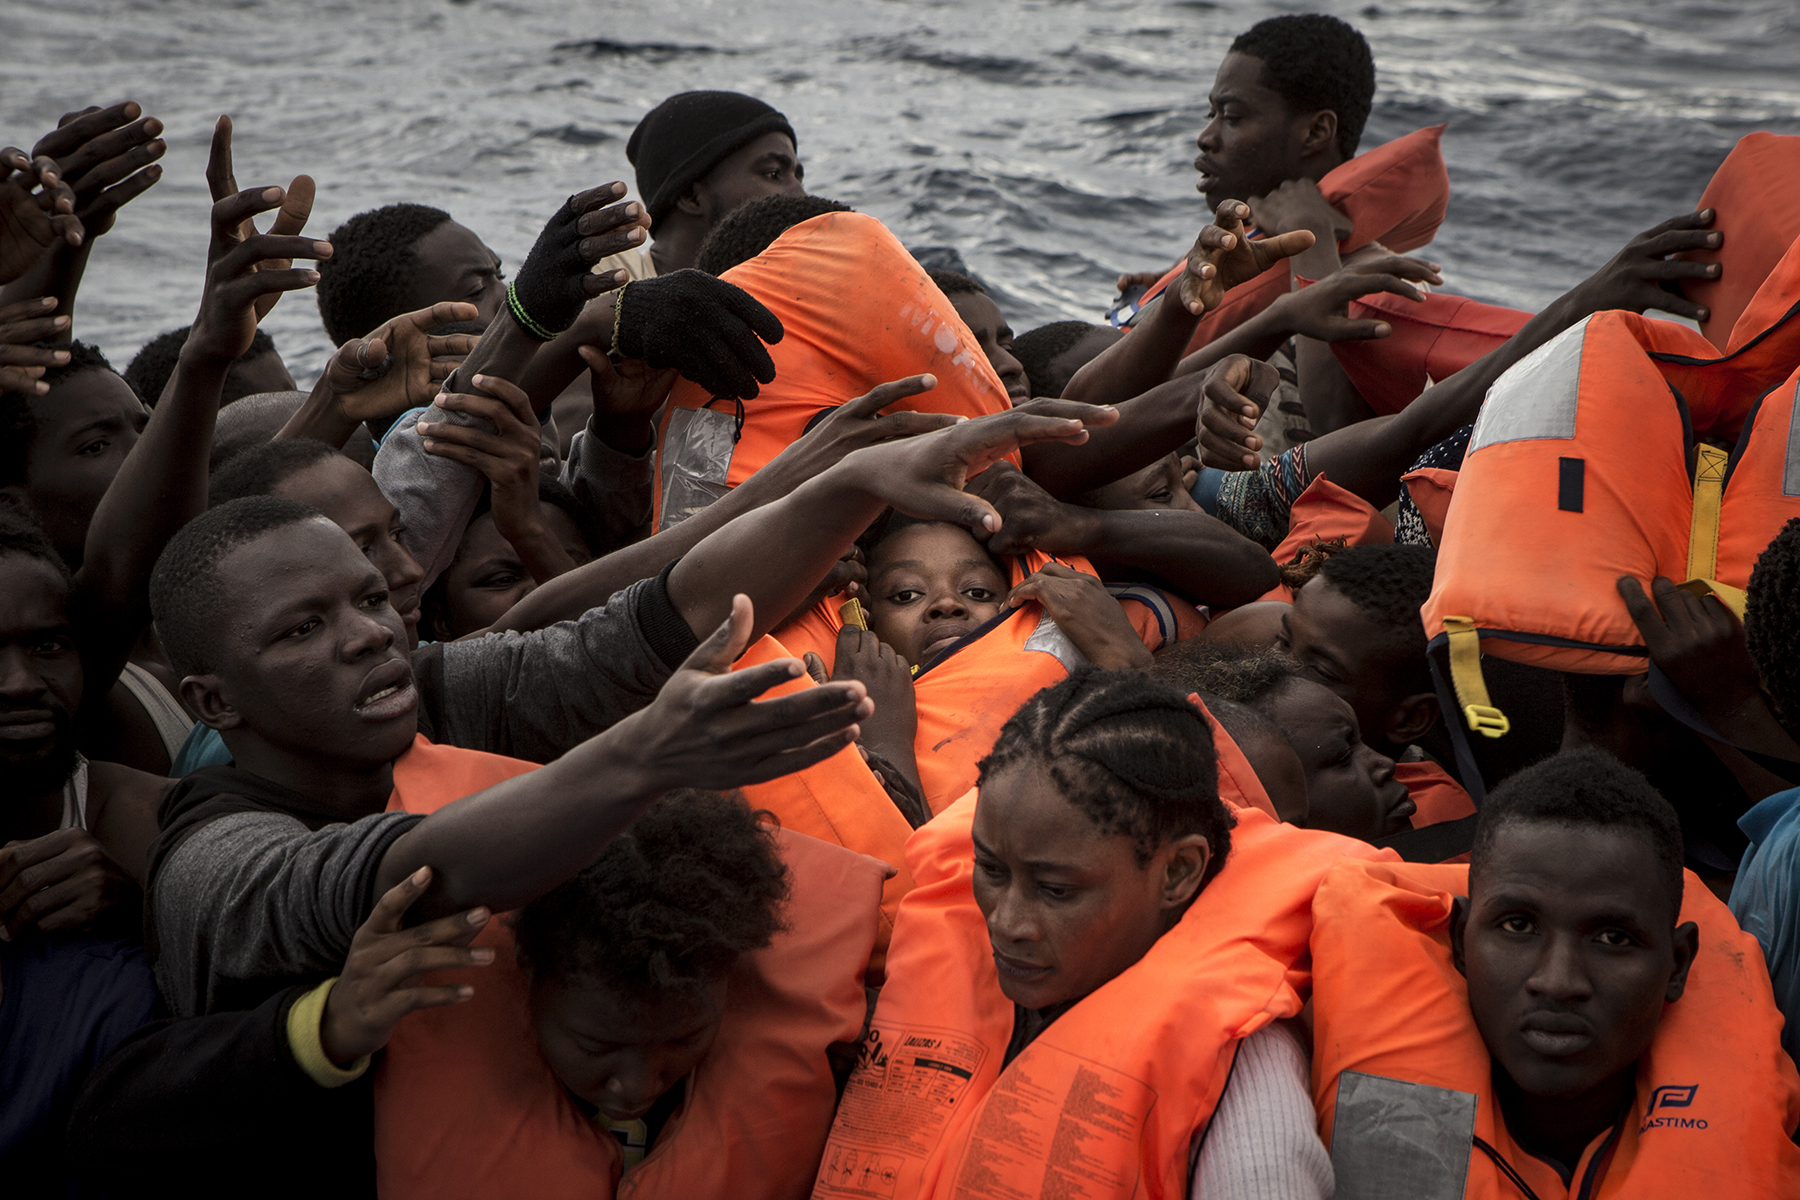 For more and more African refugees, Europe is no longer an options and set sail for South America